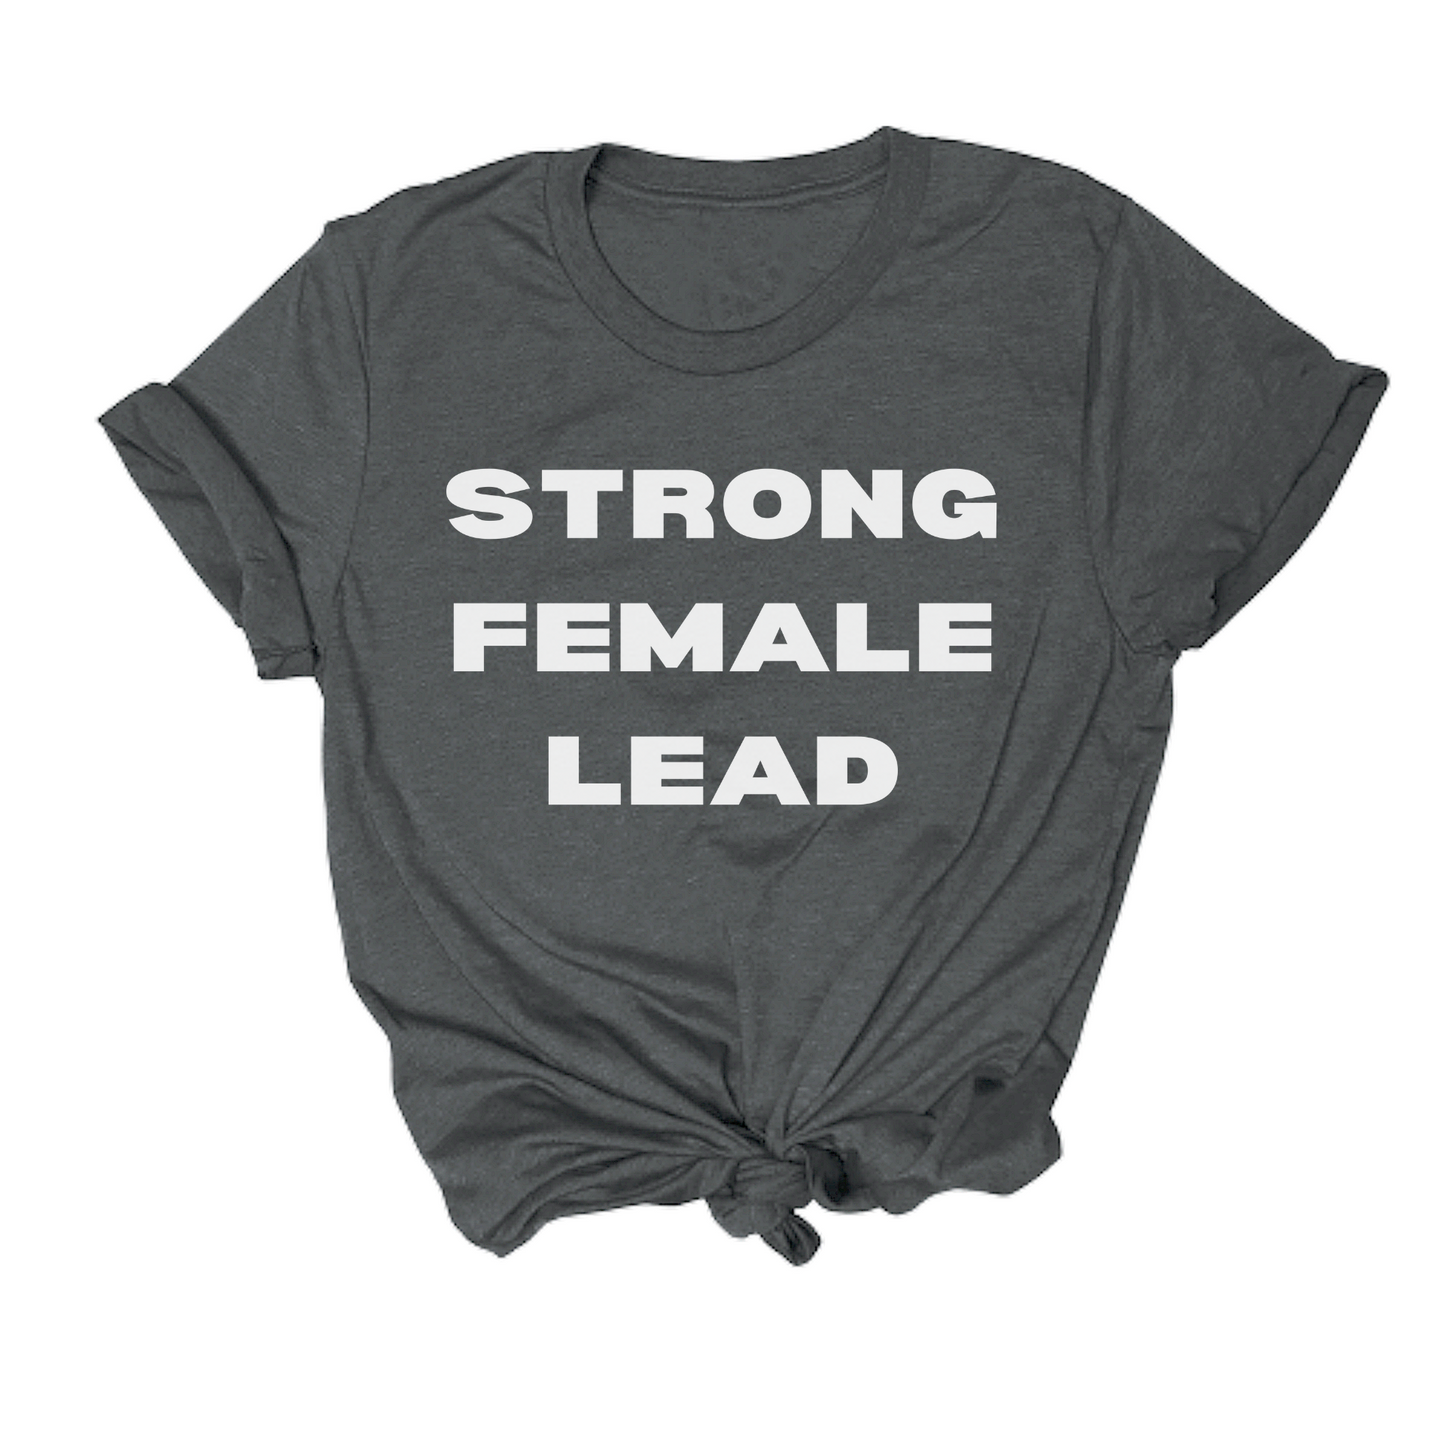 "Strong Female Lead" Tee